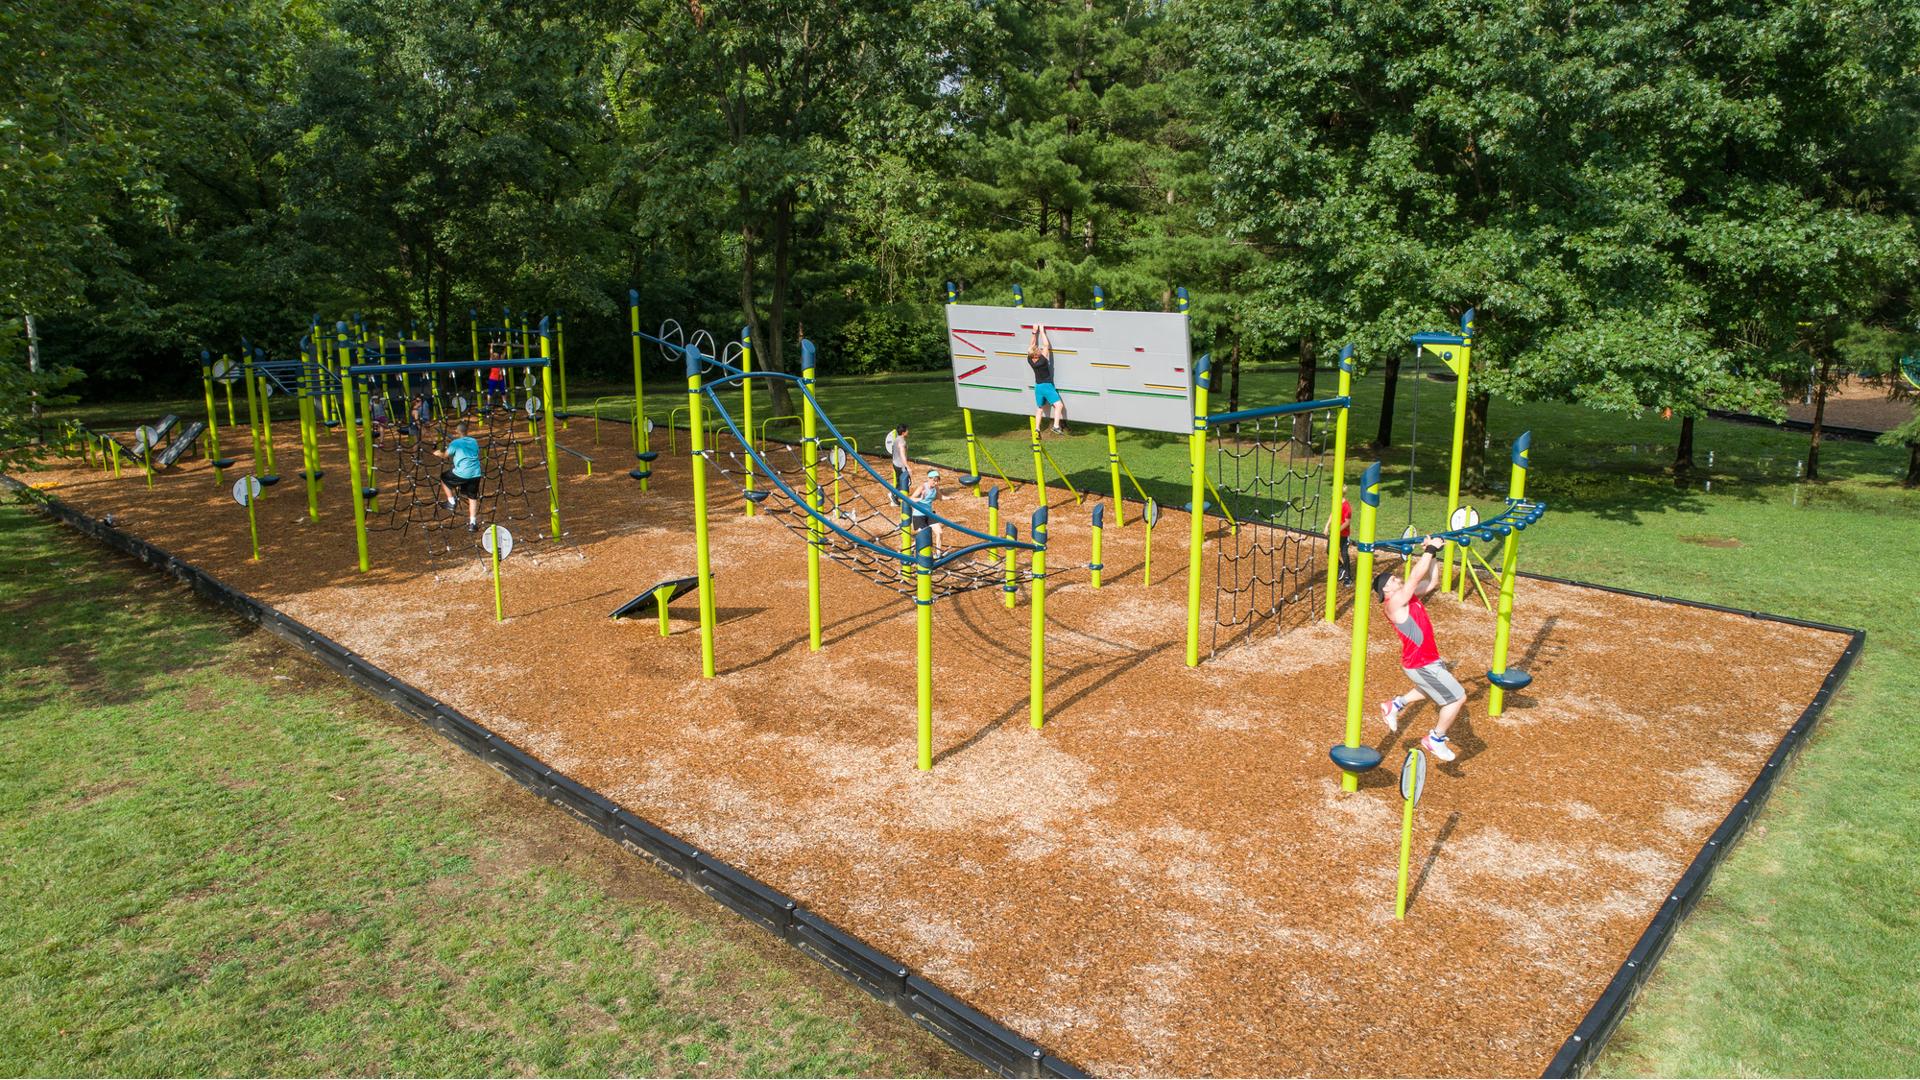 Obstacles Park